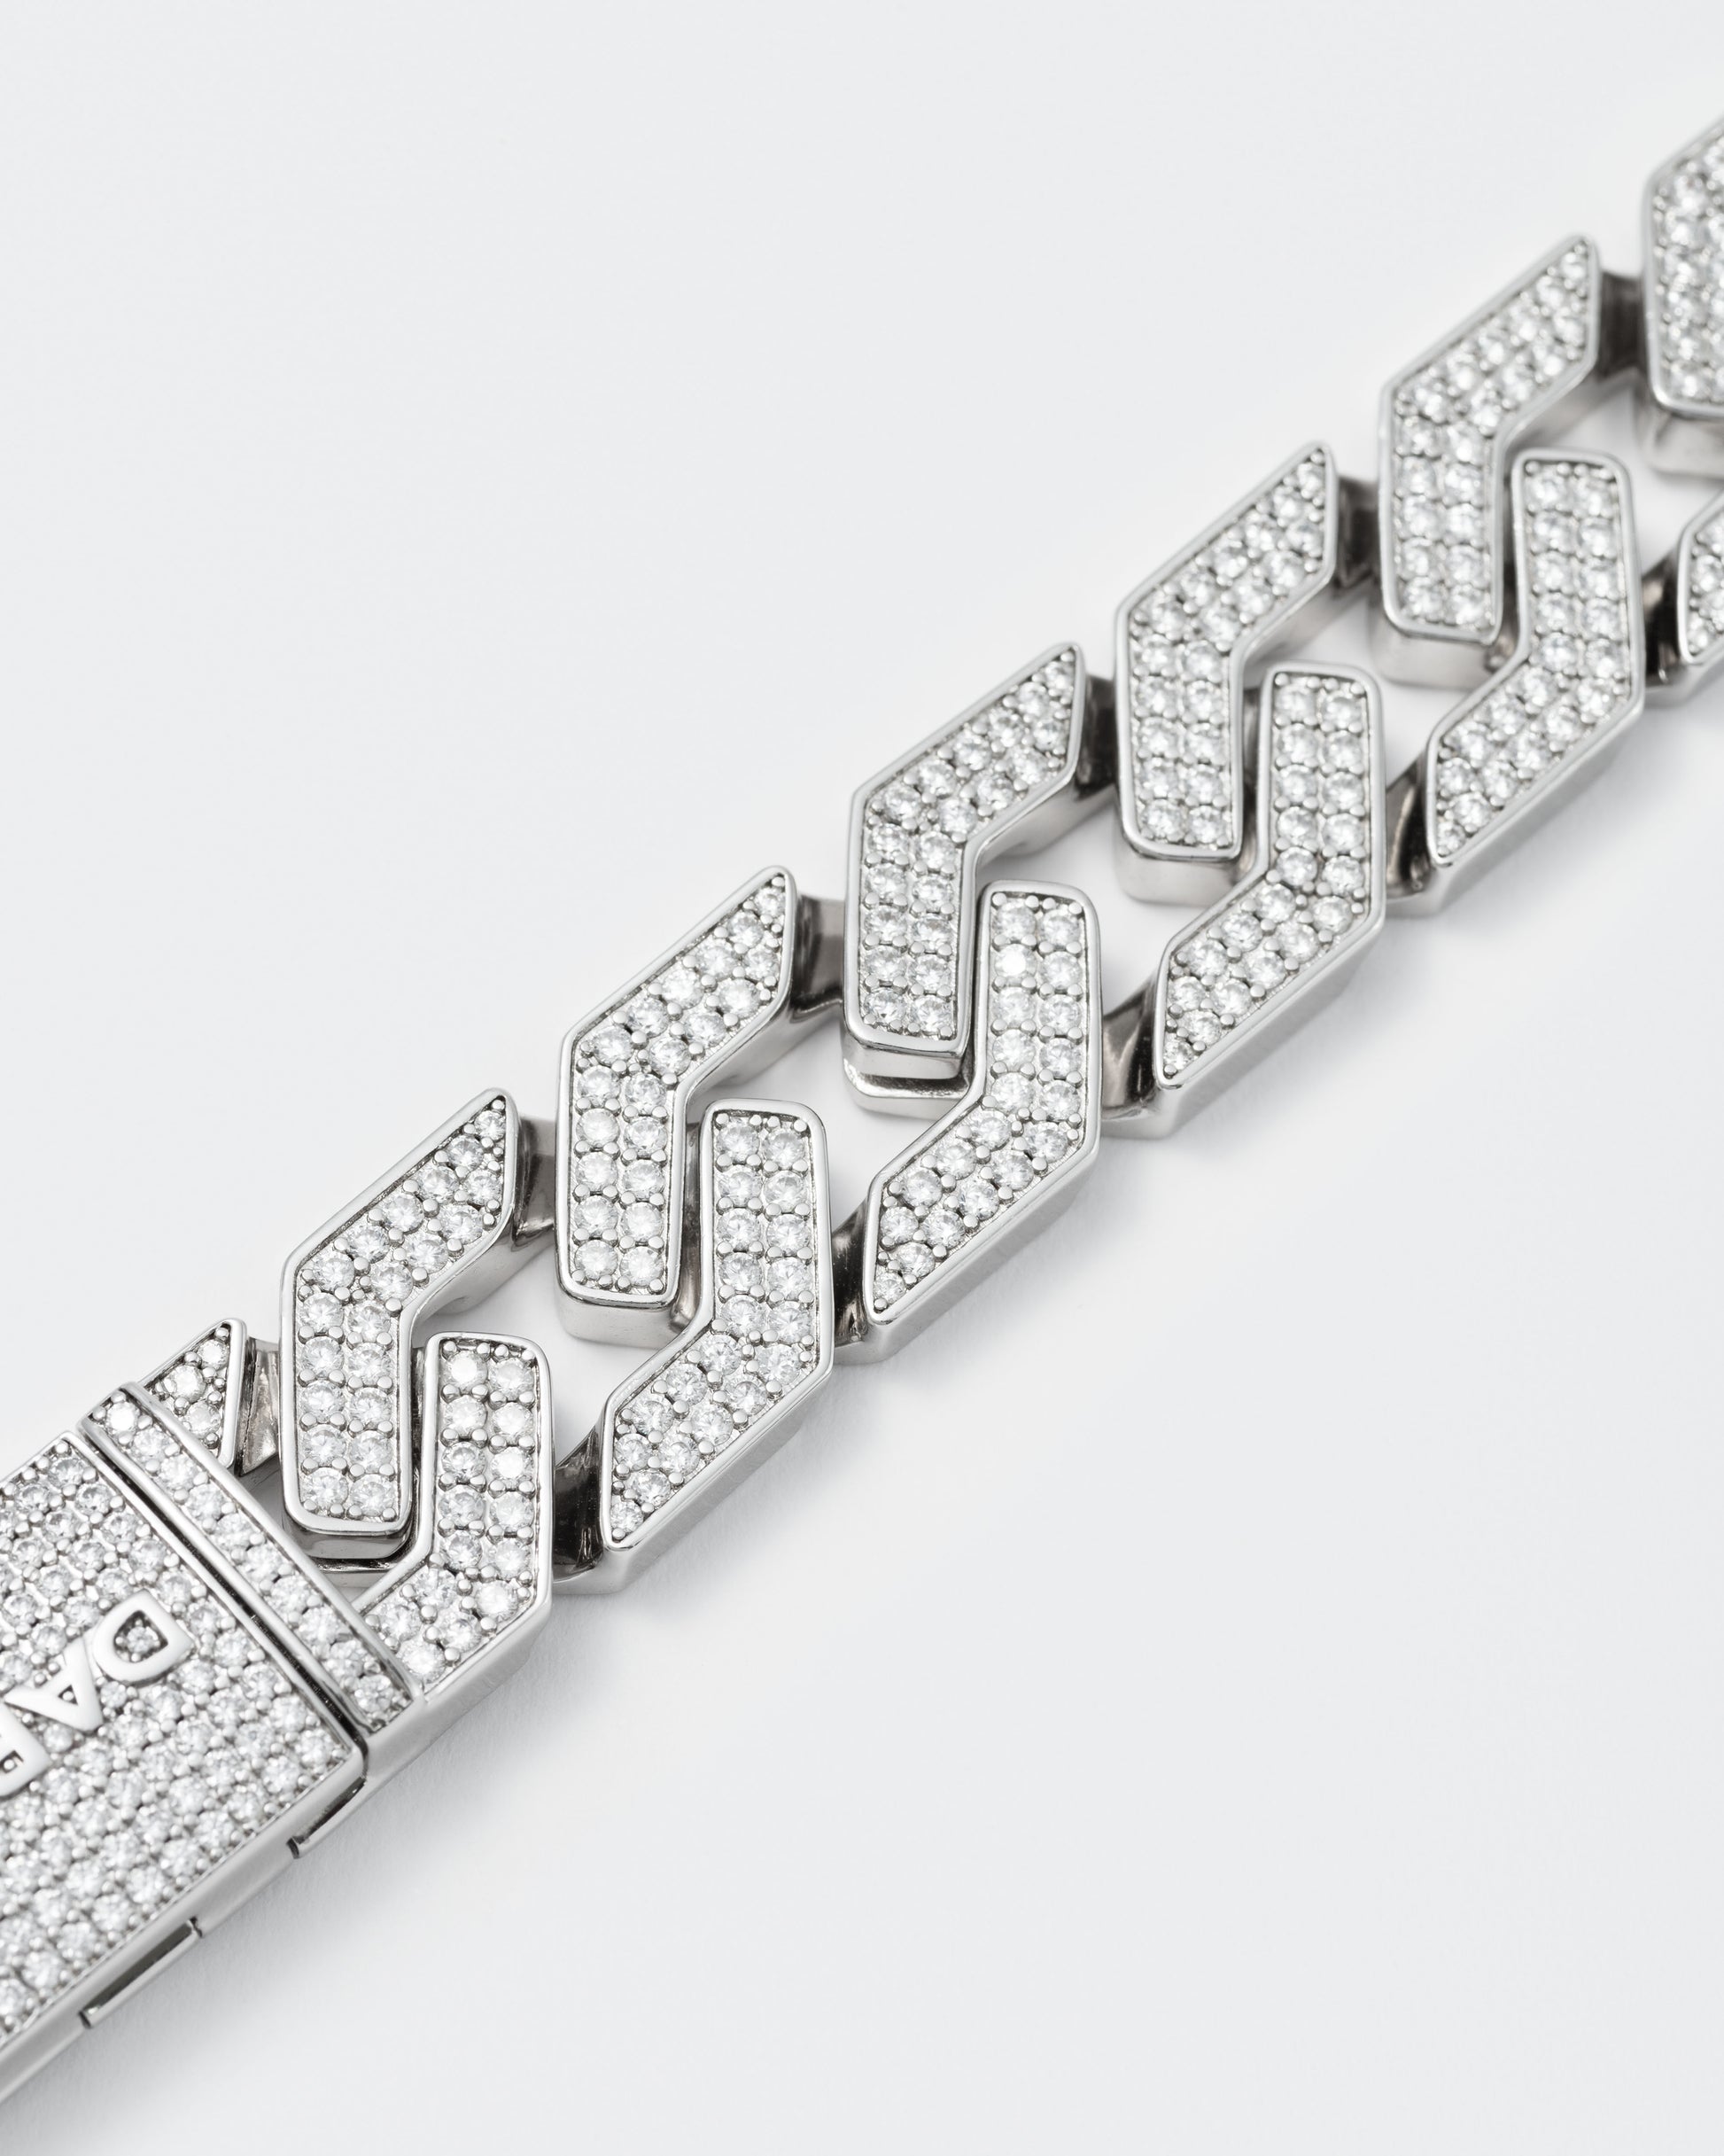 detail of oversize prong chain bracelet with 18kt white gold coating and hand-set micropavé stones in diamond white. Fine jewelry grade drawer closure with logo.